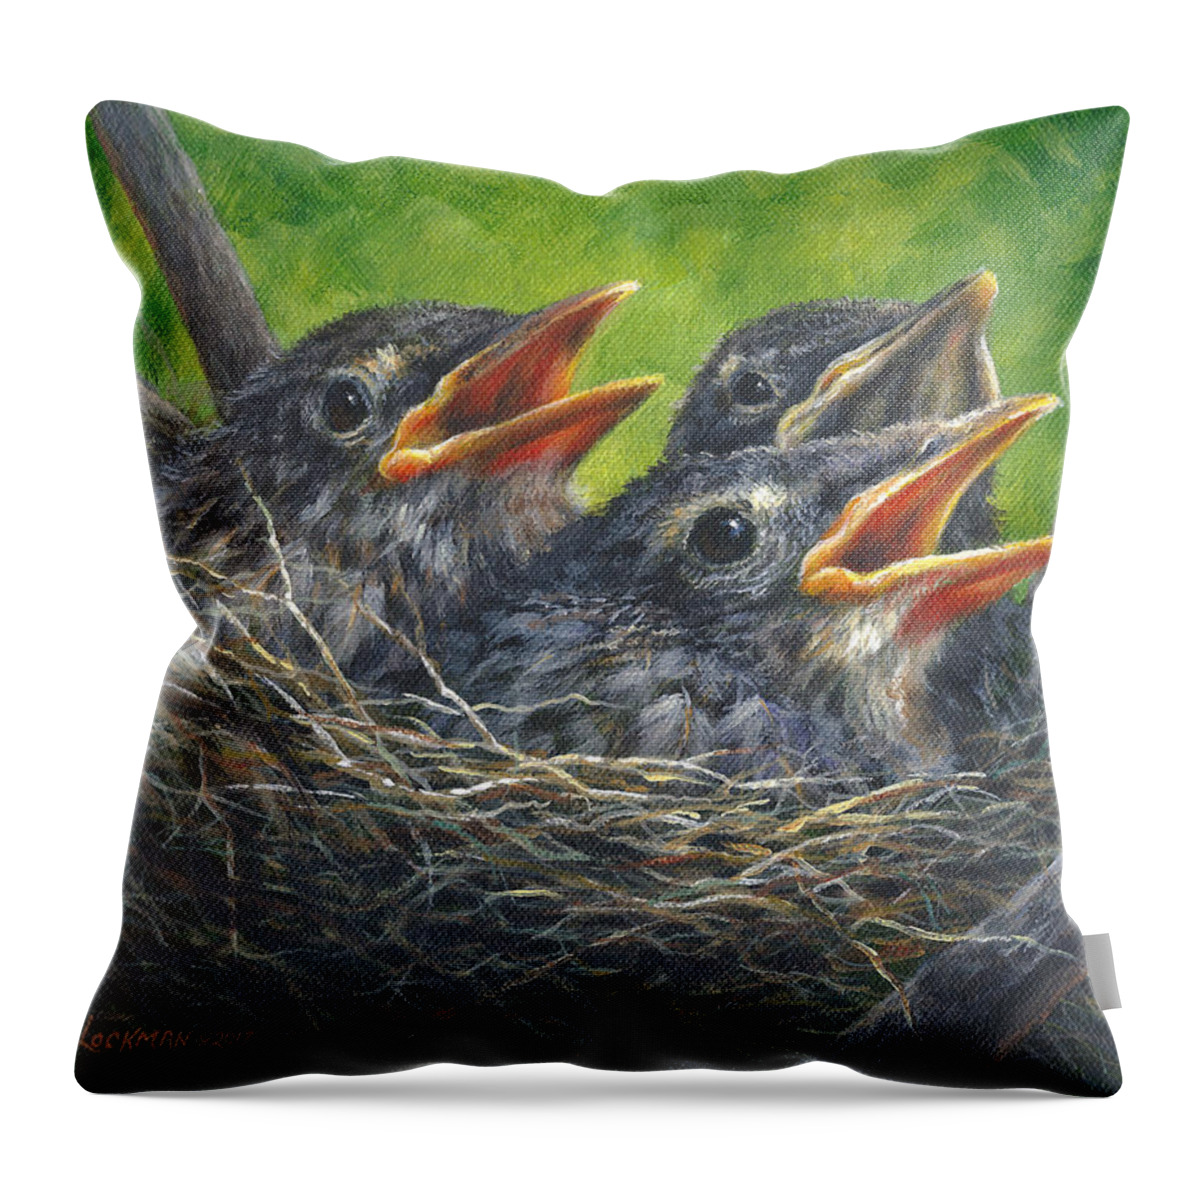 Baby Robins Throw Pillow featuring the painting Baby Robins by Kim Lockman